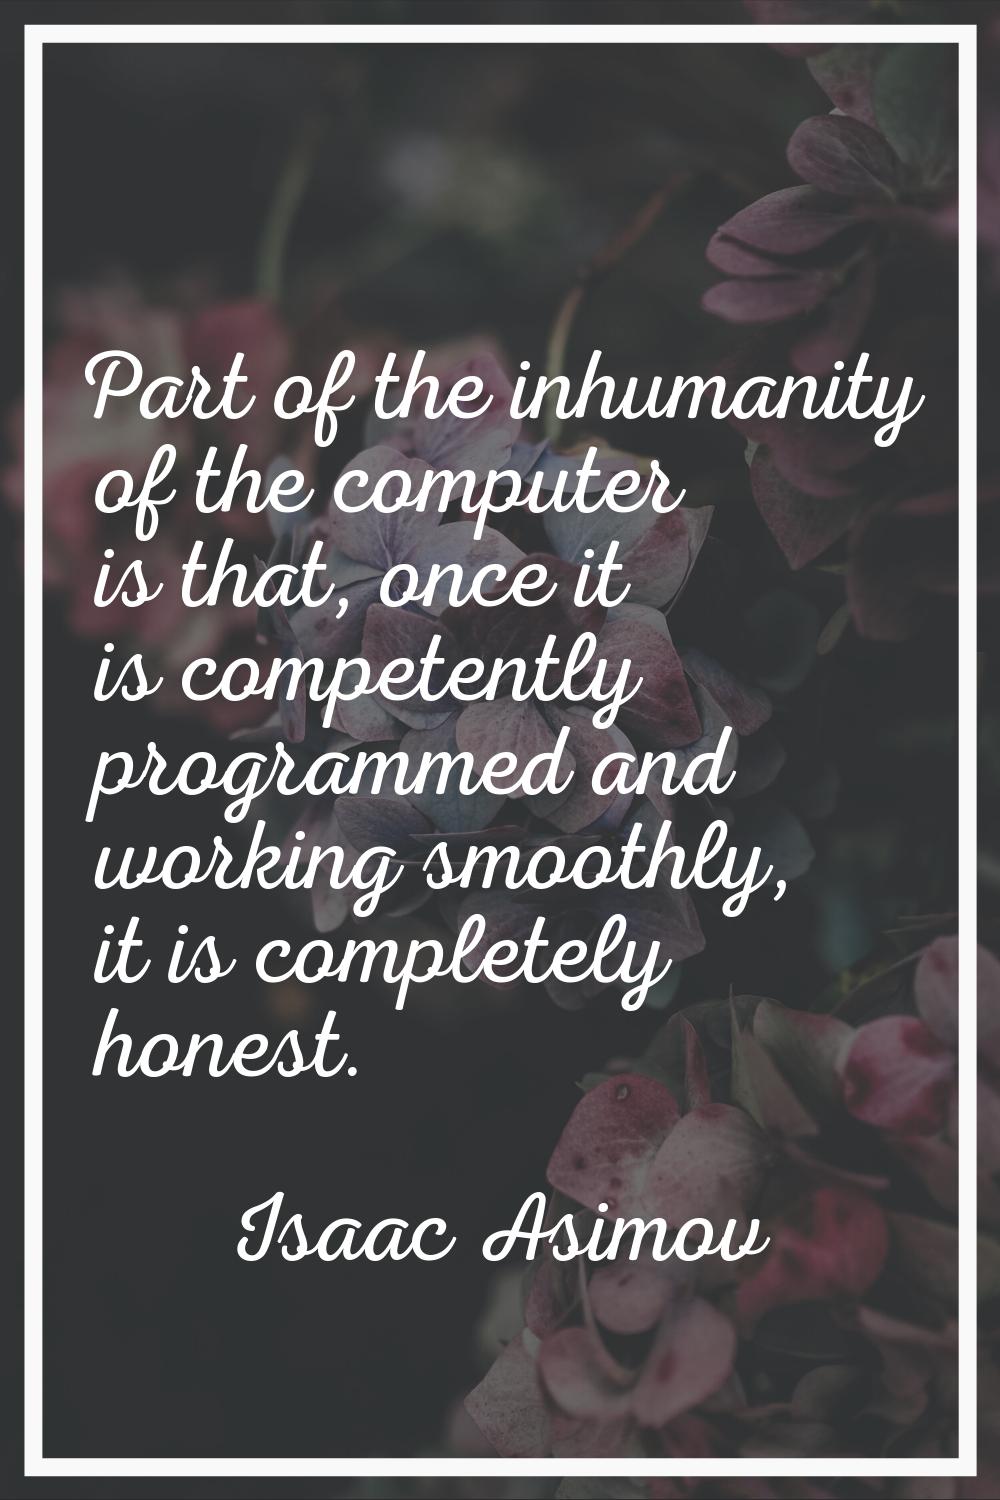 Part of the inhumanity of the computer is that, once it is competently programmed and working smoot